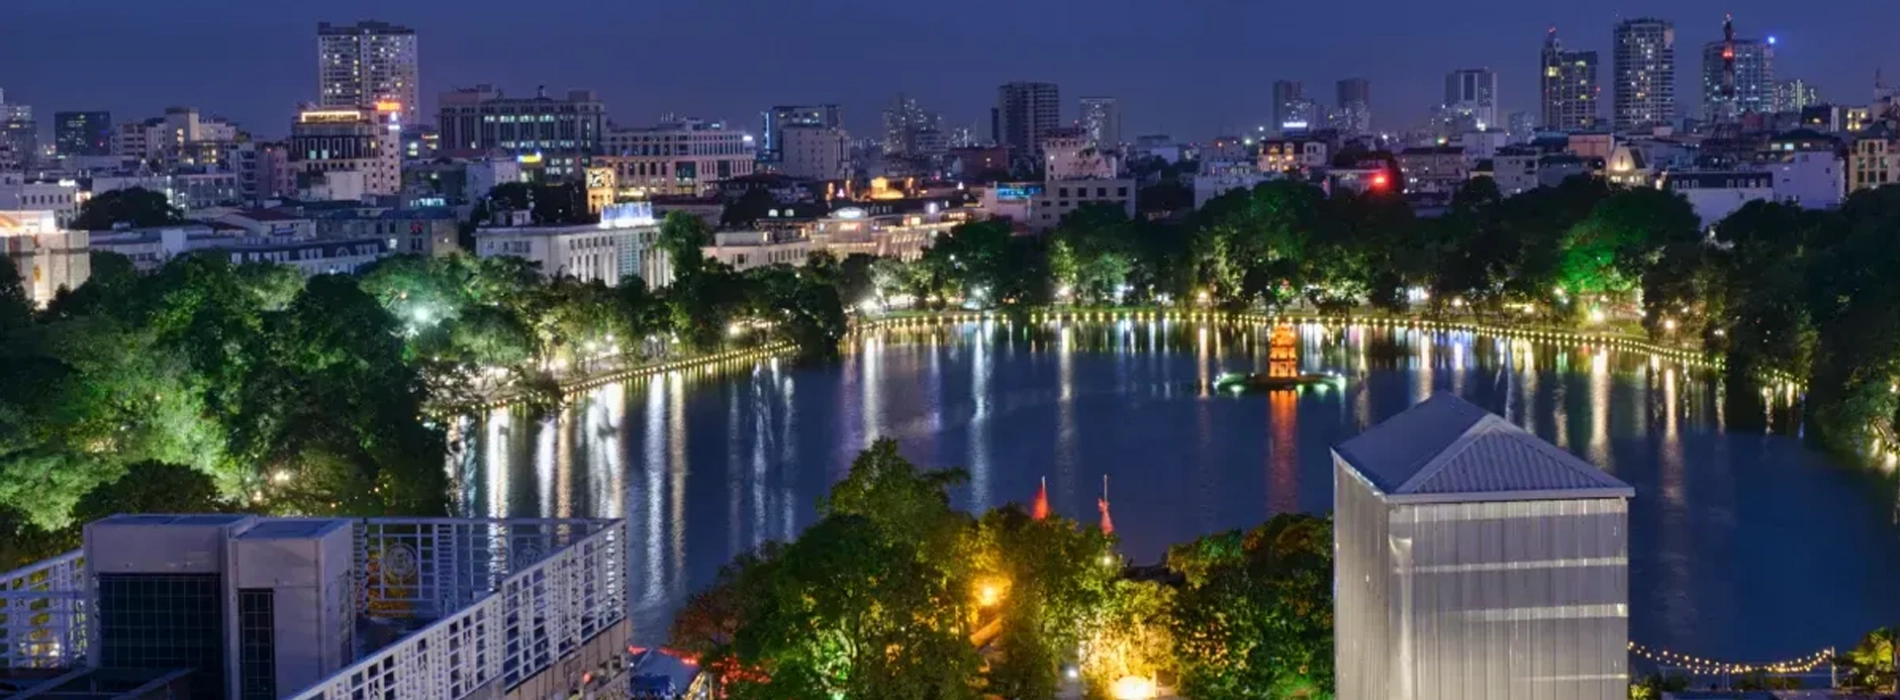 Things to do at night in Hanoi: Experiencing the vibrant nightlife in the Capital